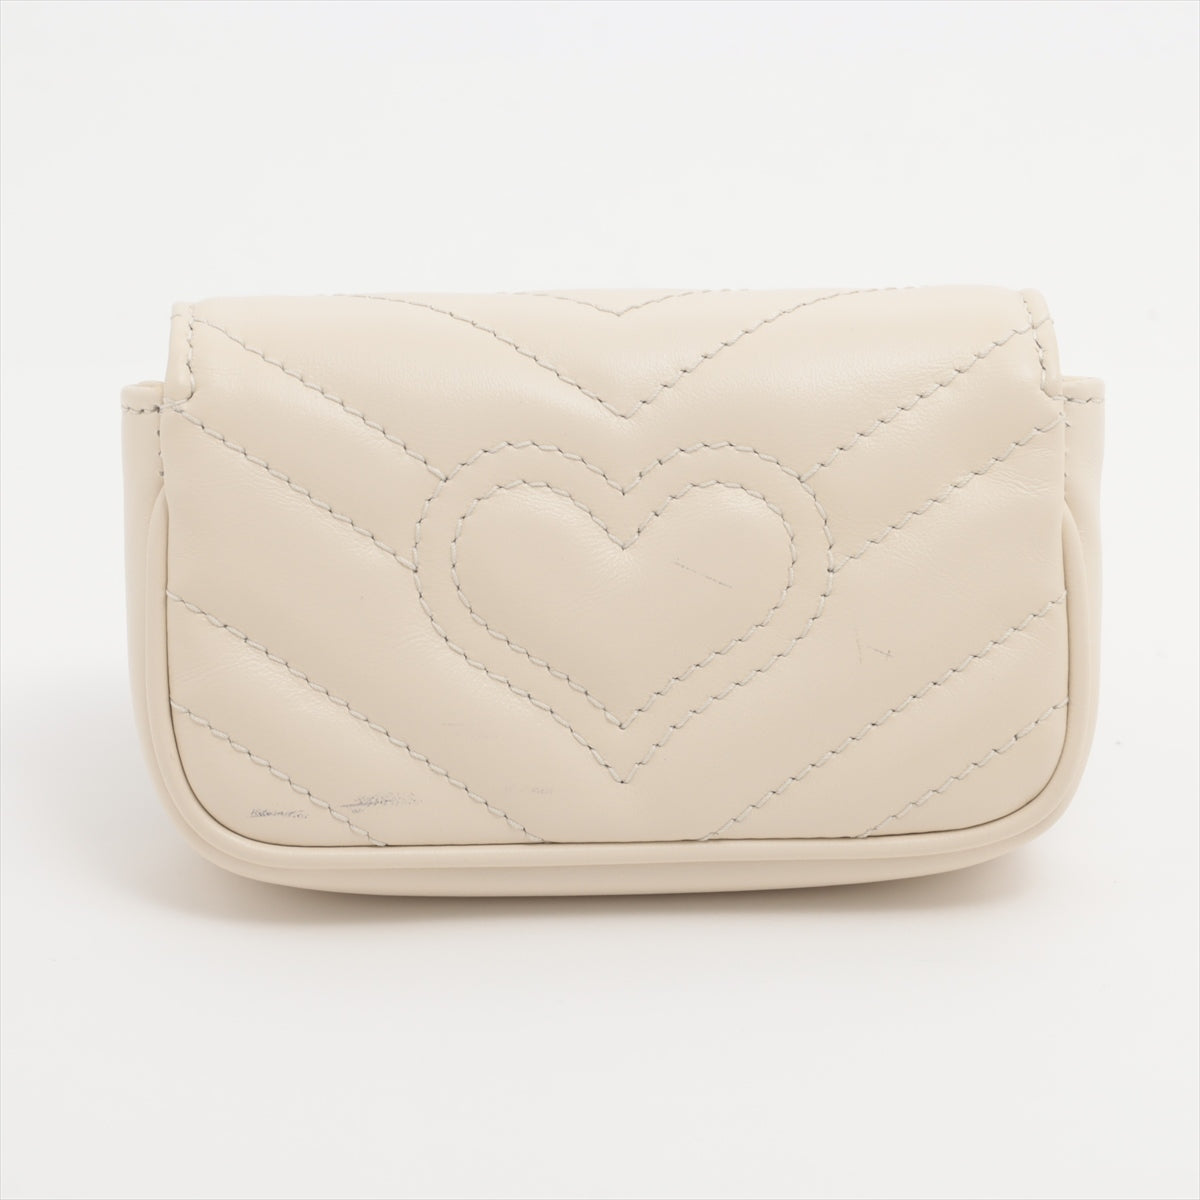 Gucci GG Marmont 575161 Leather Pouch Ivory